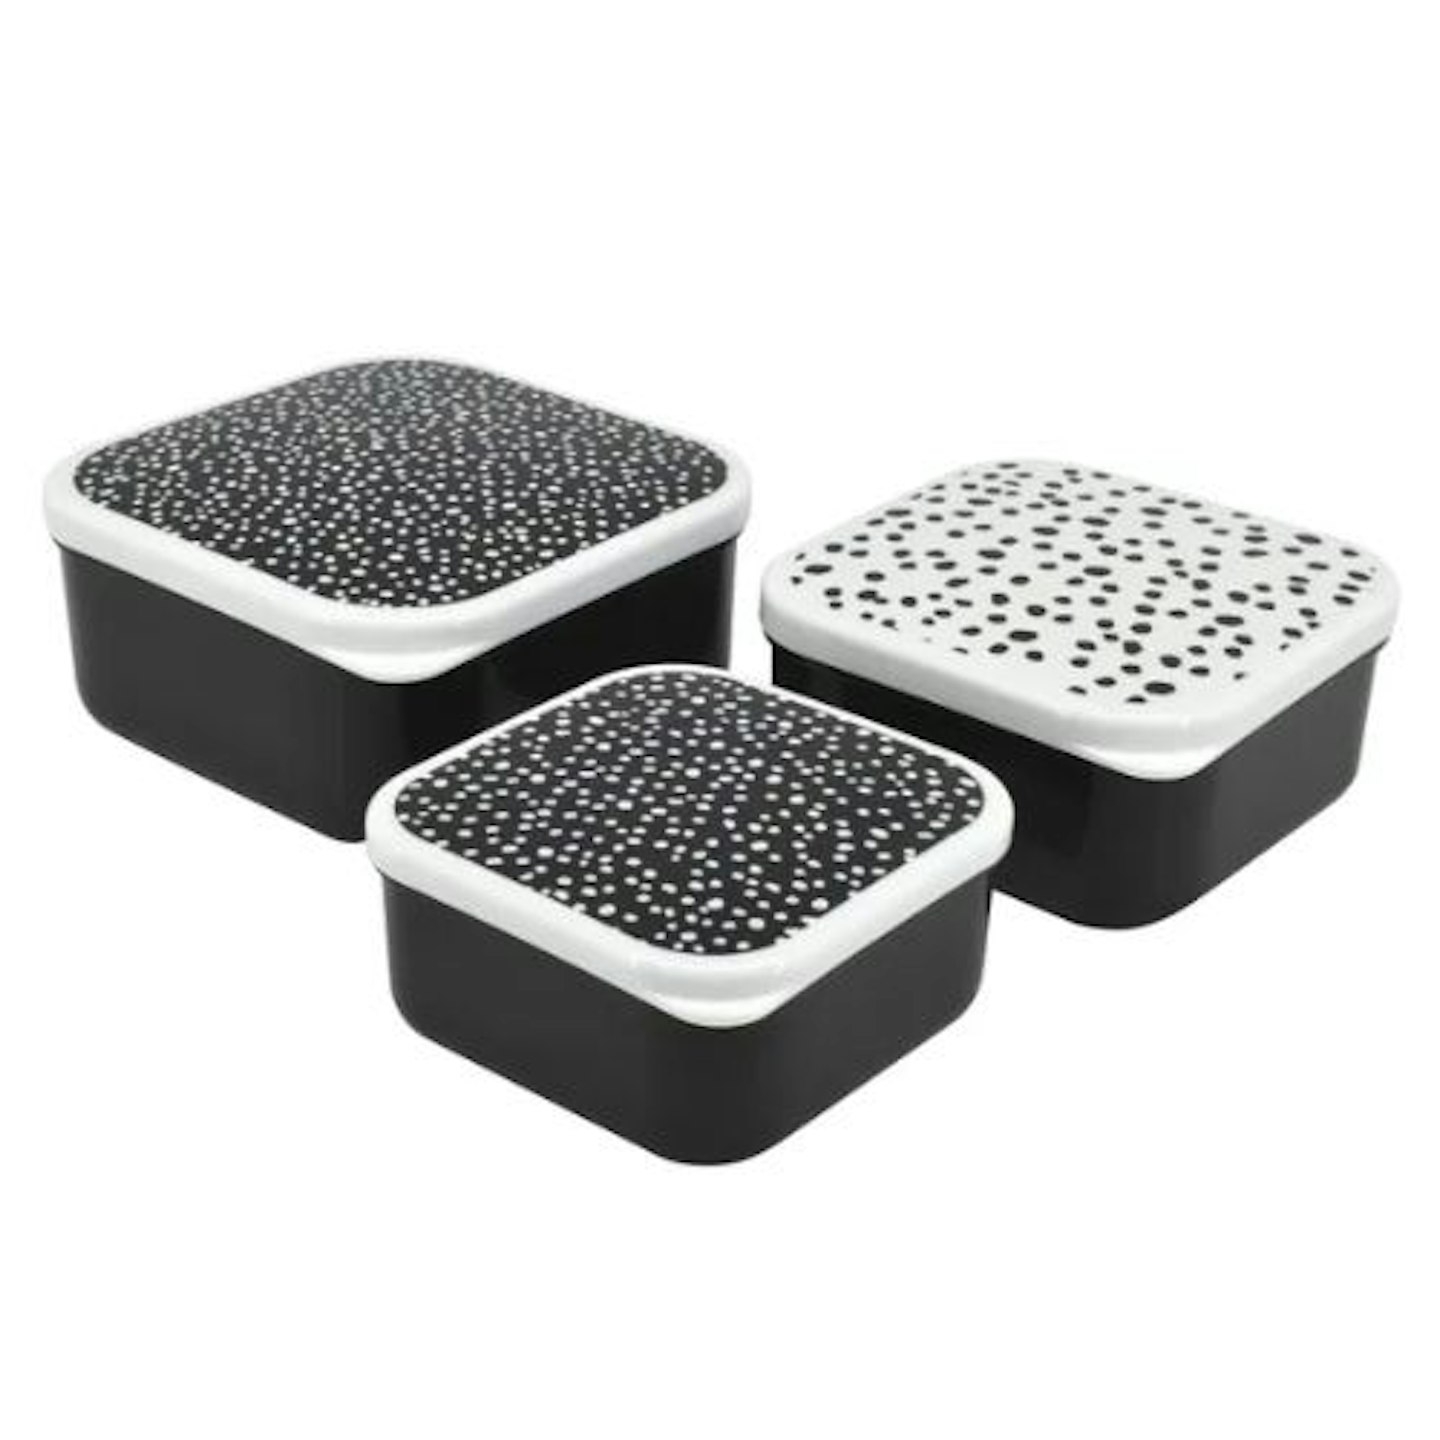 Set of 3 Global Dot Snack Boxes